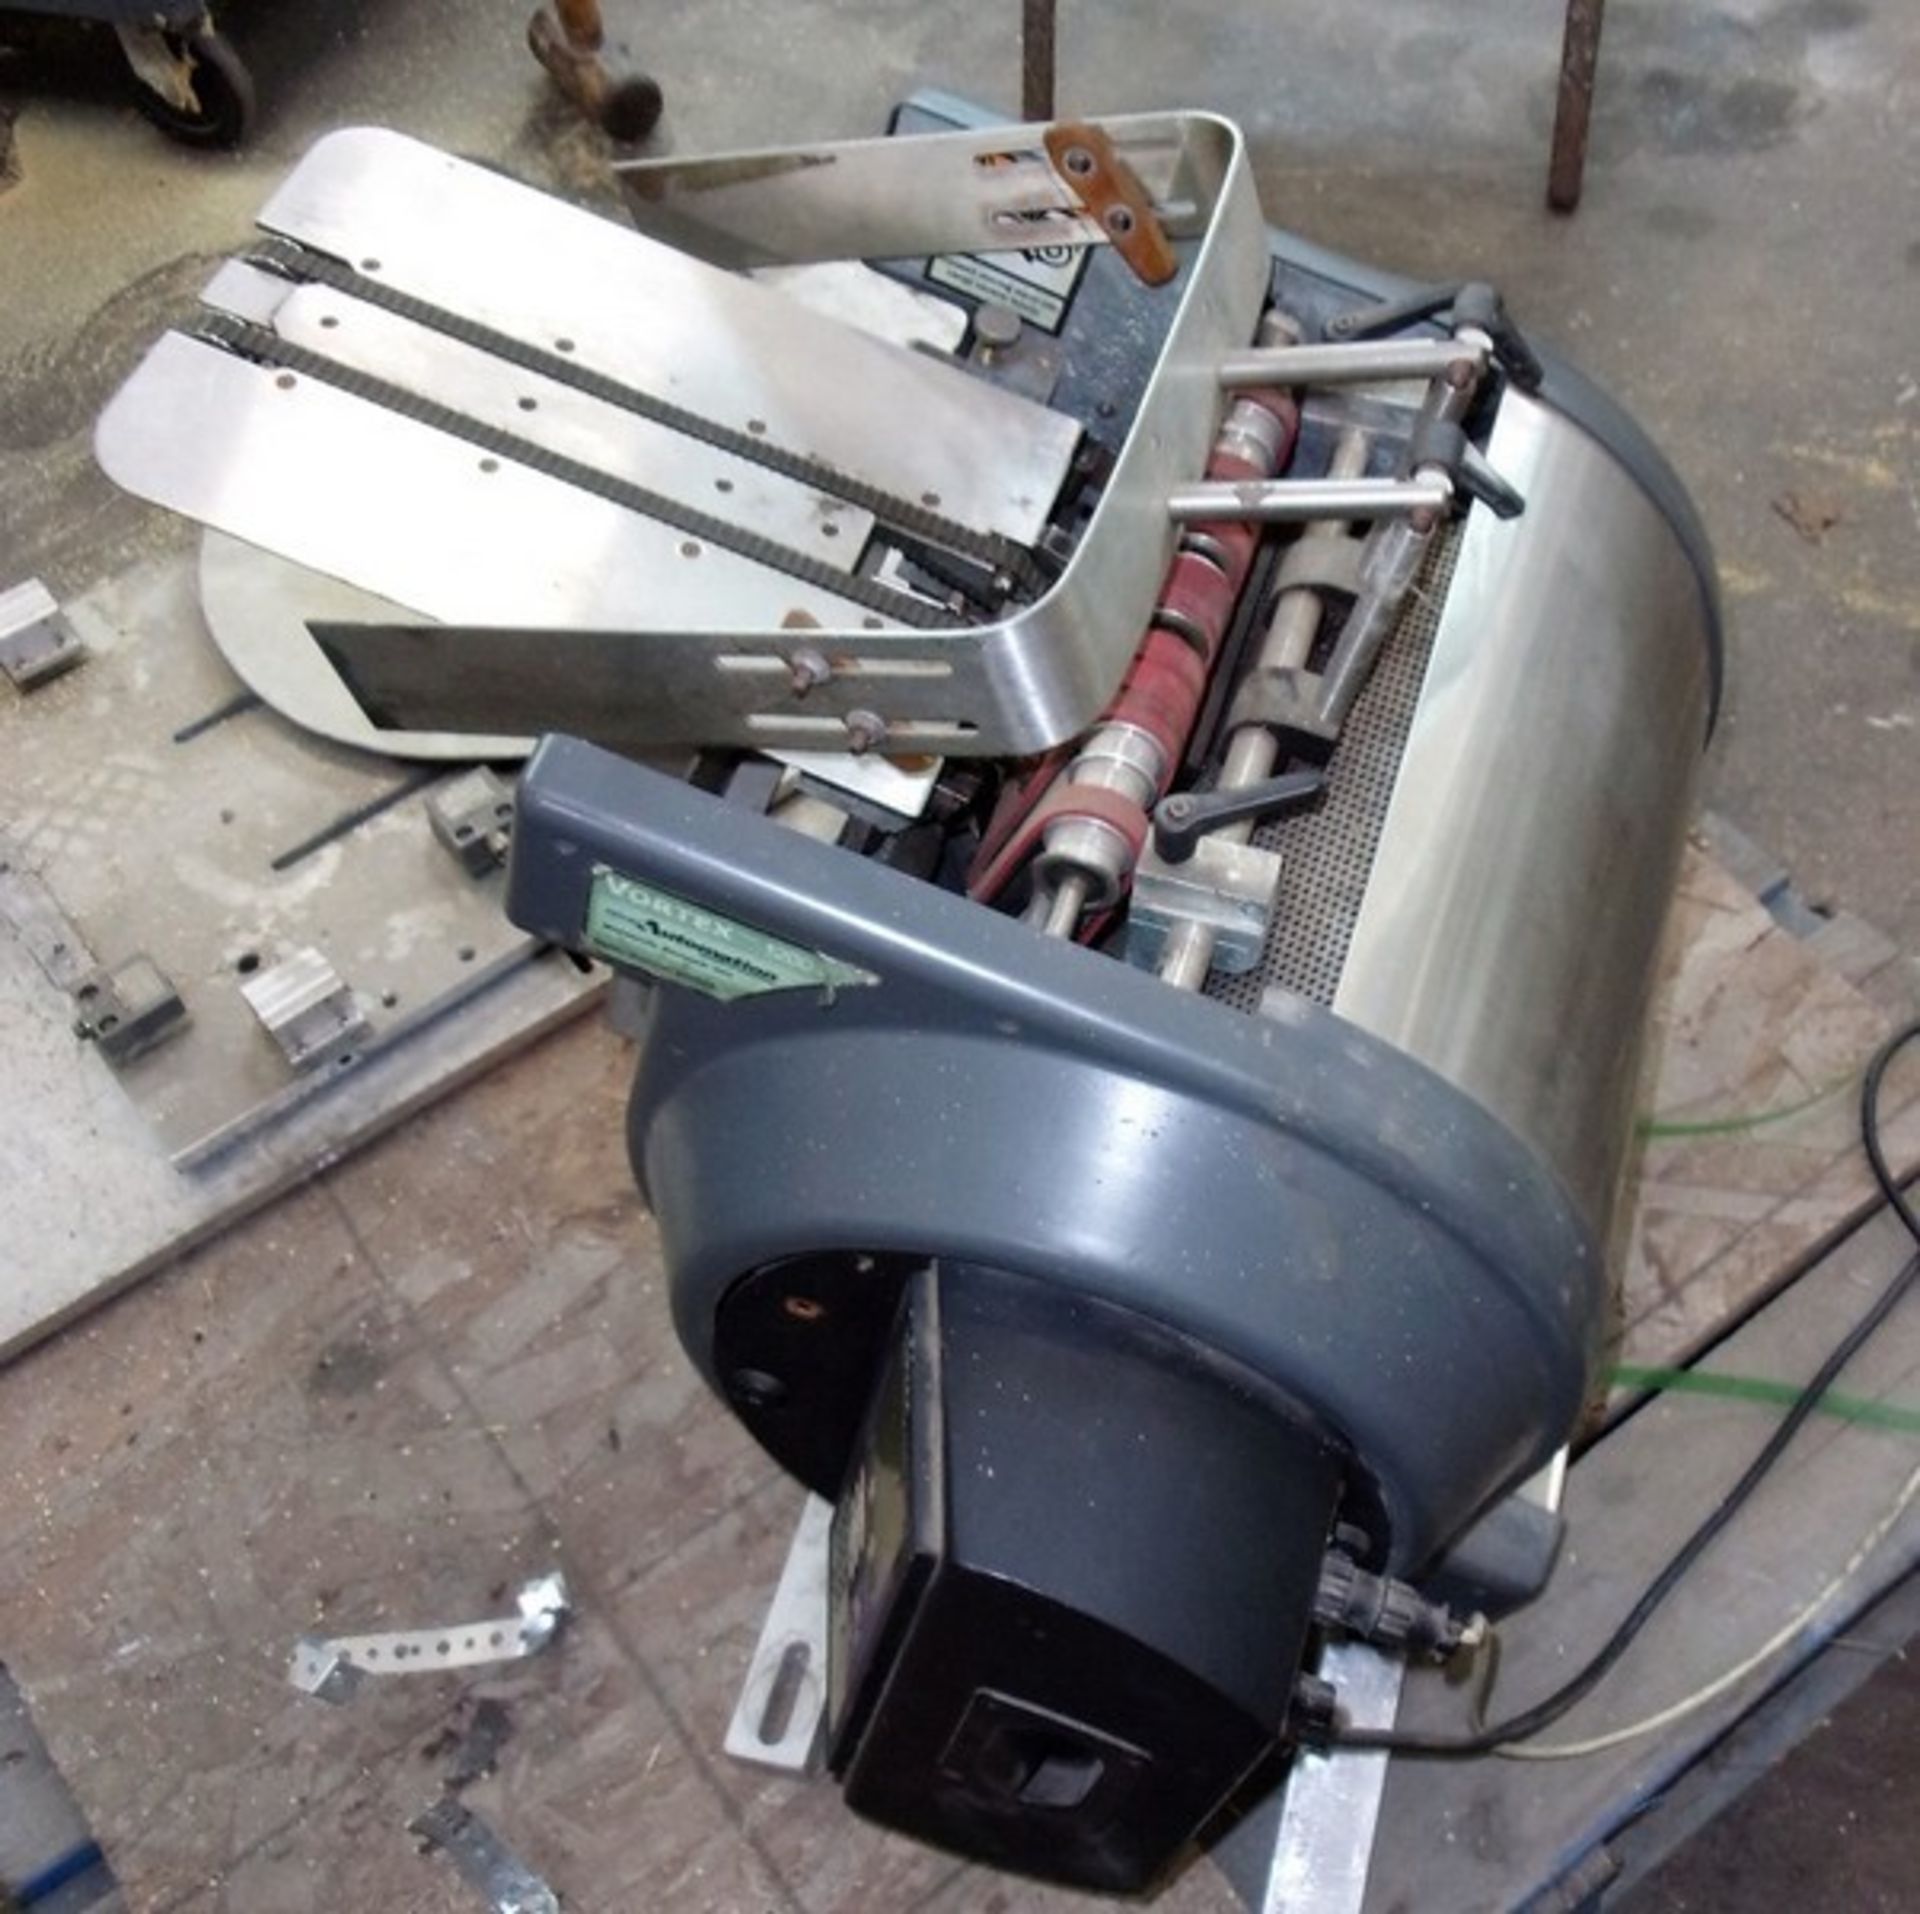 Vortex Inline Automation Auto Adjusting Friction Feeder, Model 1200L, S/N 040803, Unit was last used - Image 2 of 8